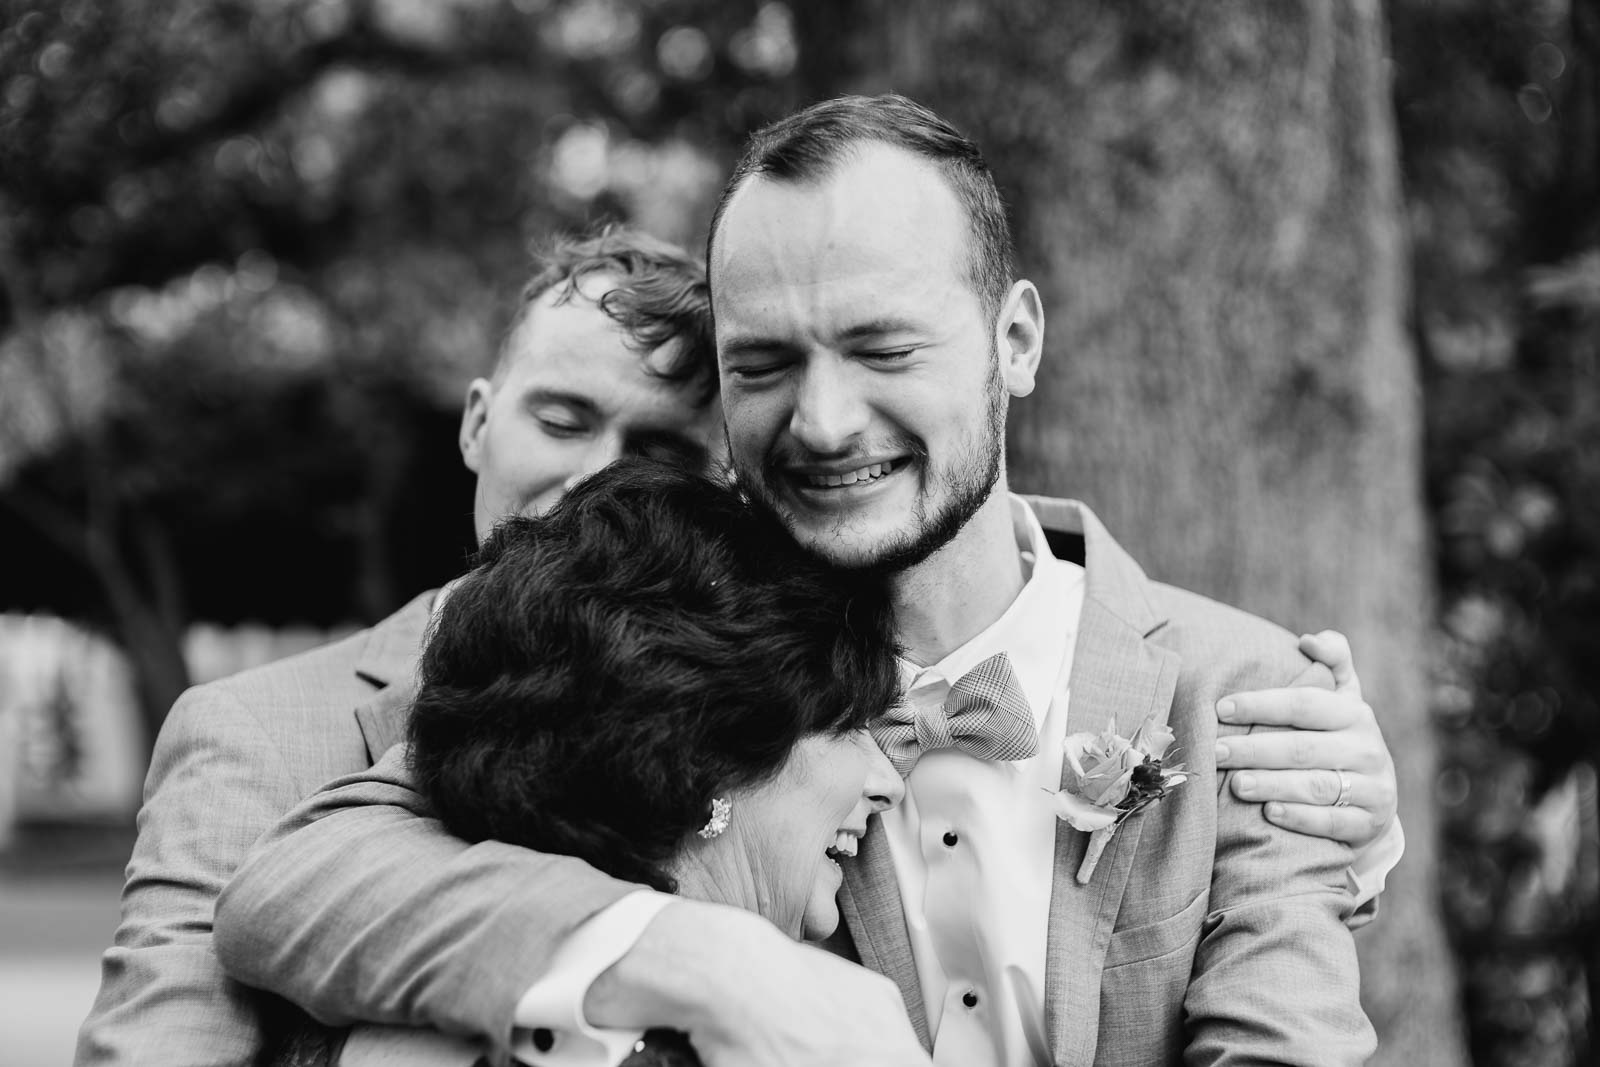 The brother of the groom hugs his mother as a cry and joy